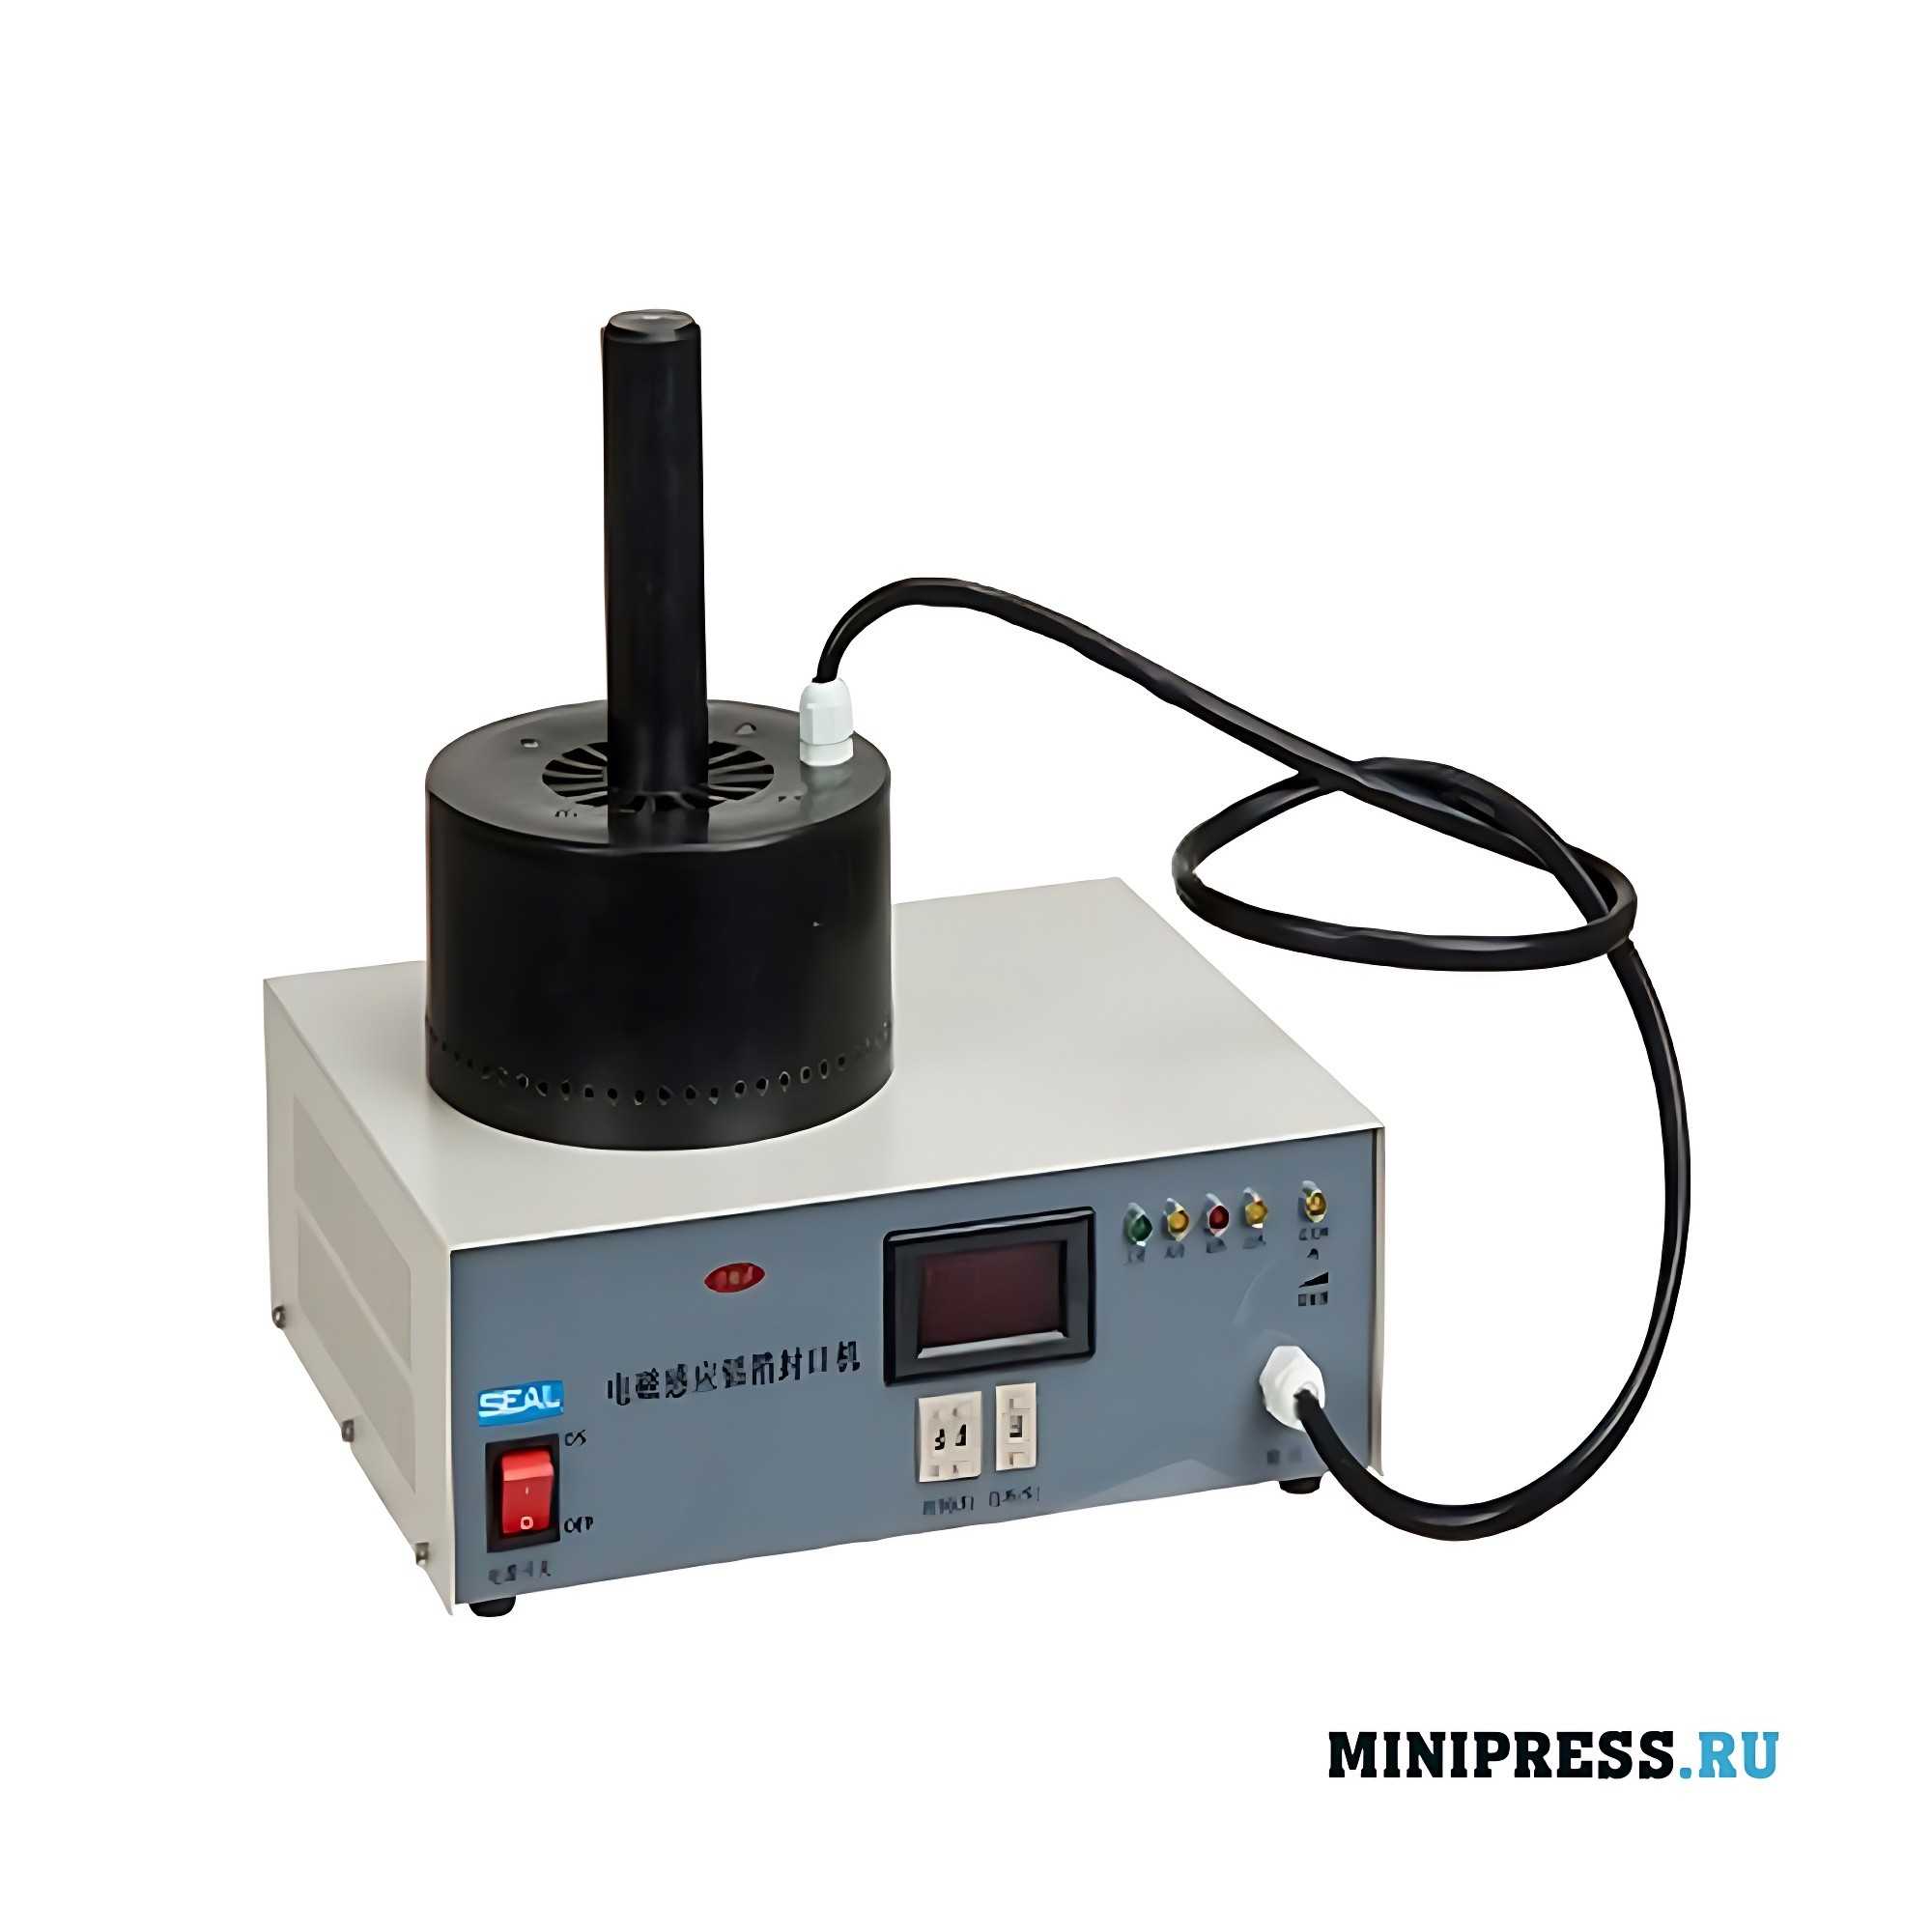 Equipment for electromagnetic induction sealing of the neck with aluminum foil GS 07